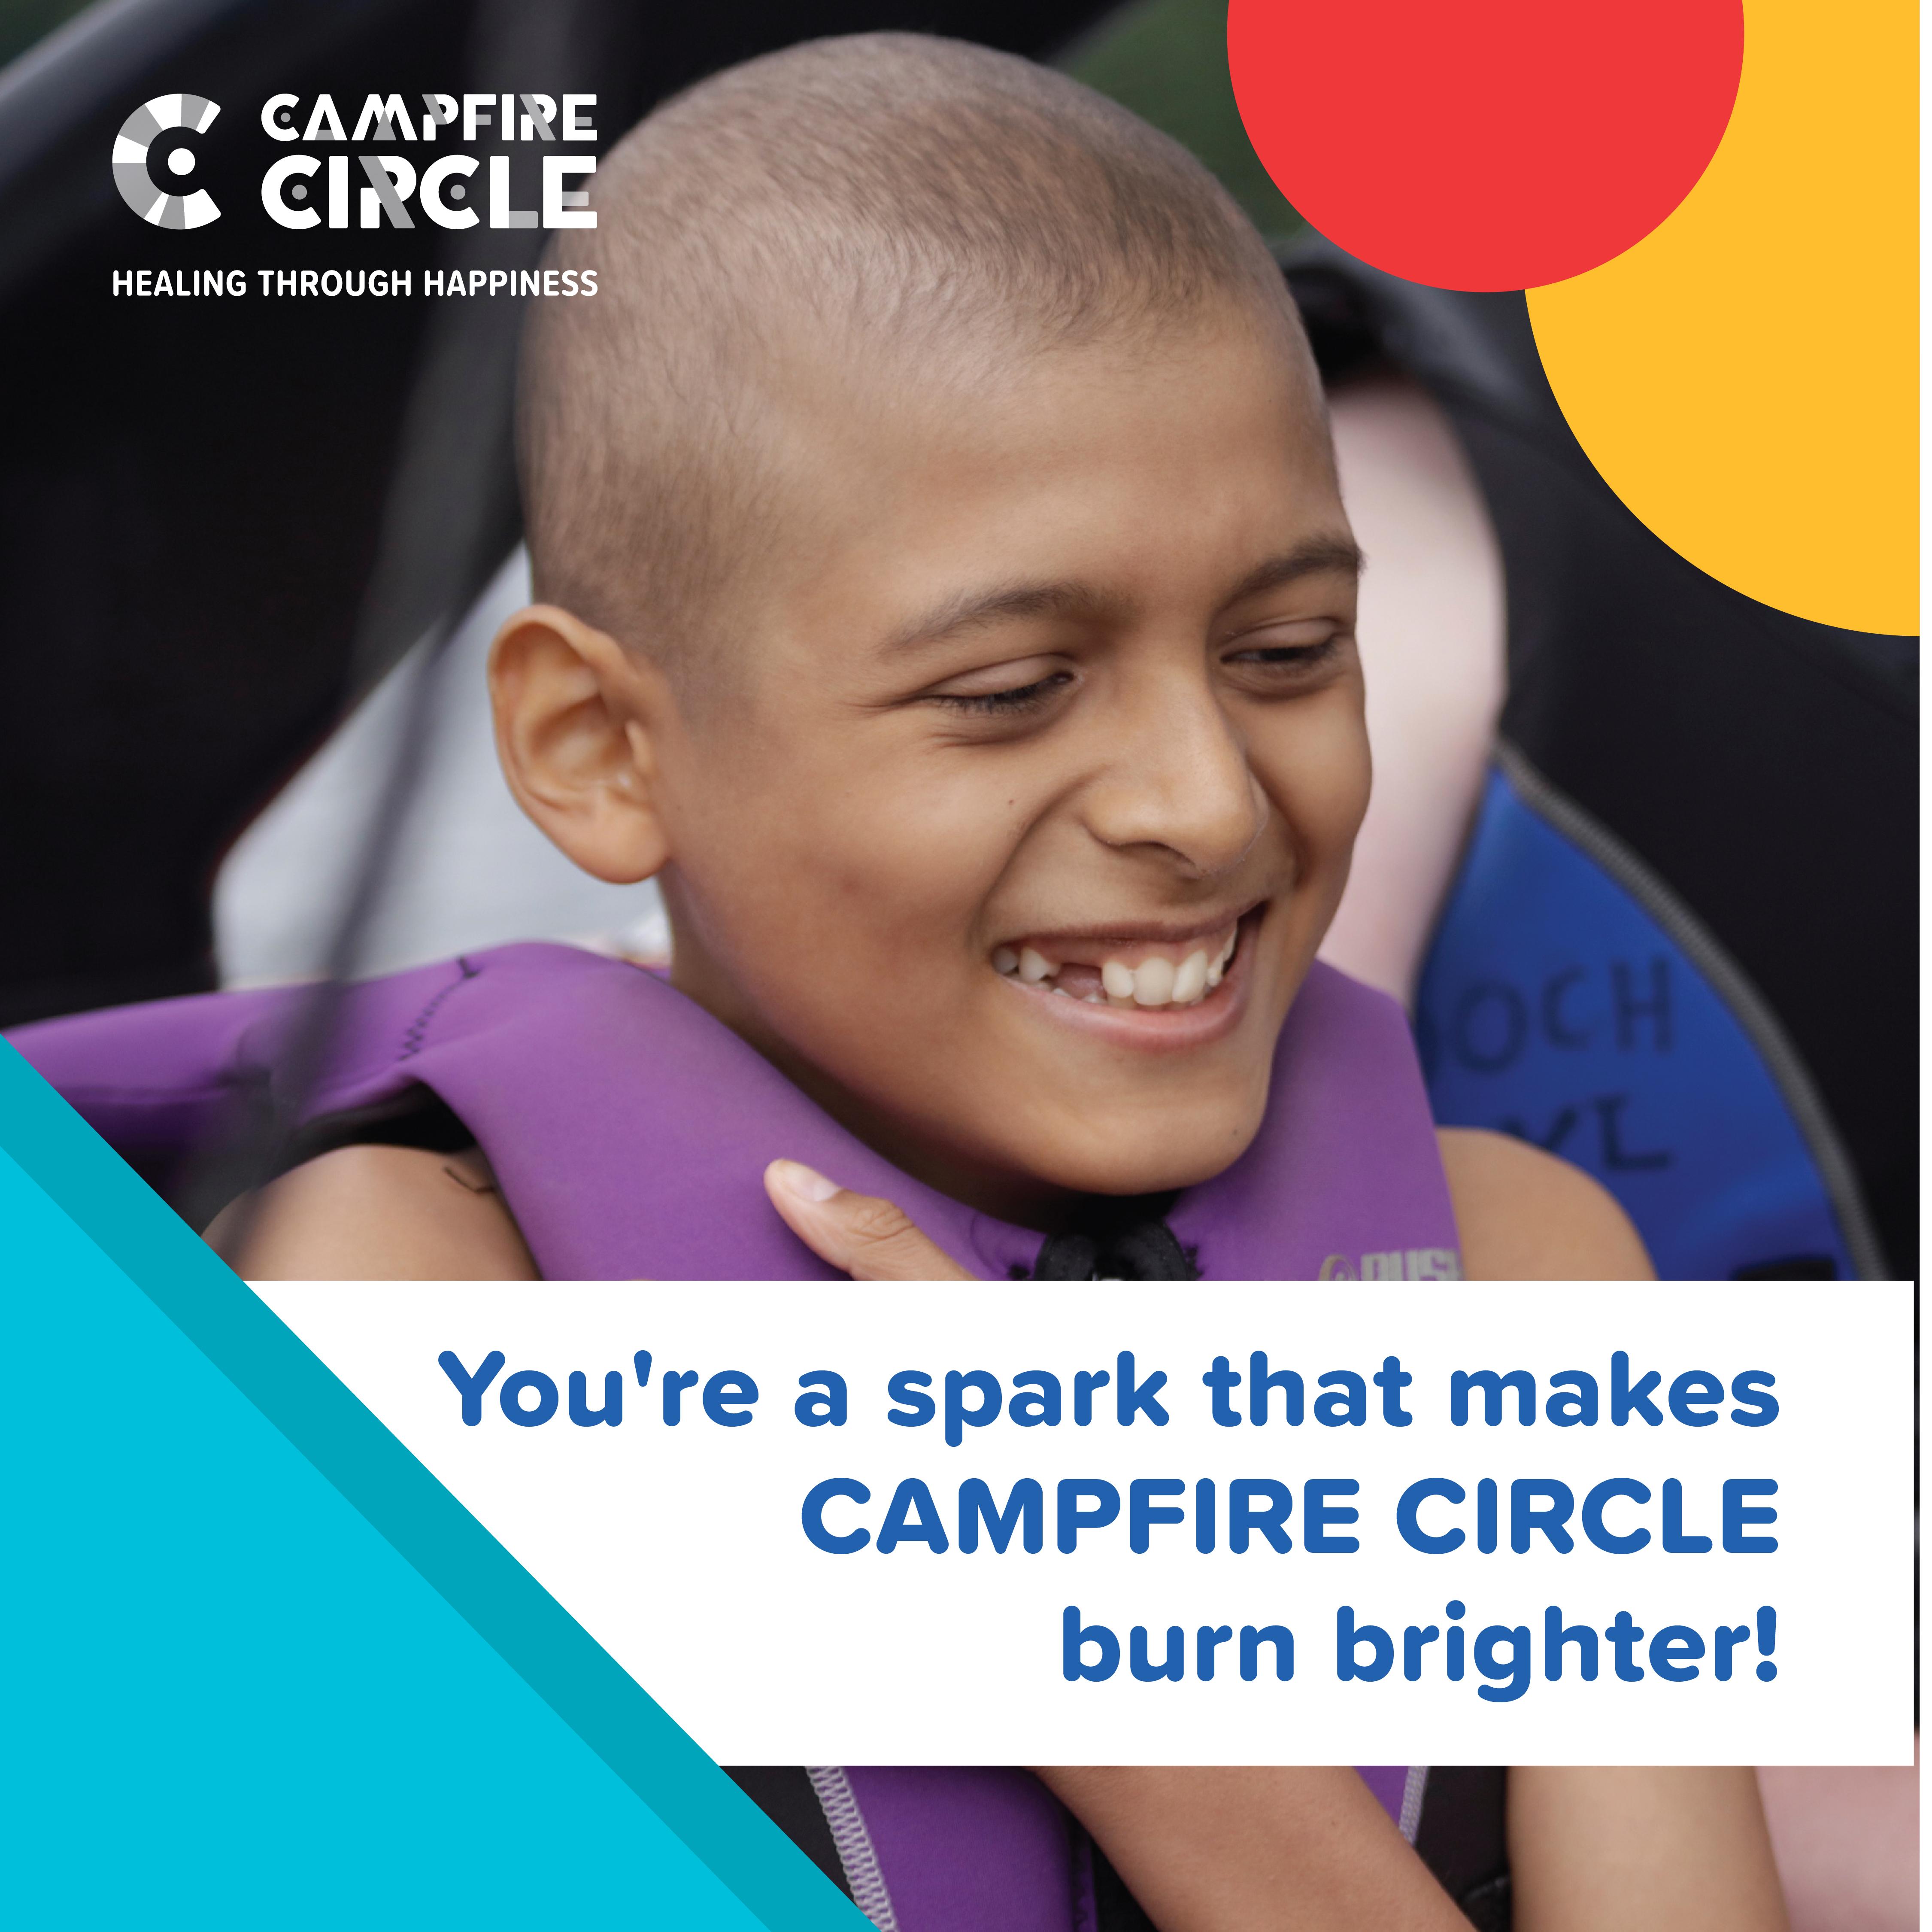 You're a spark that makes CAMPFIRE CIRCLE burn brighter!